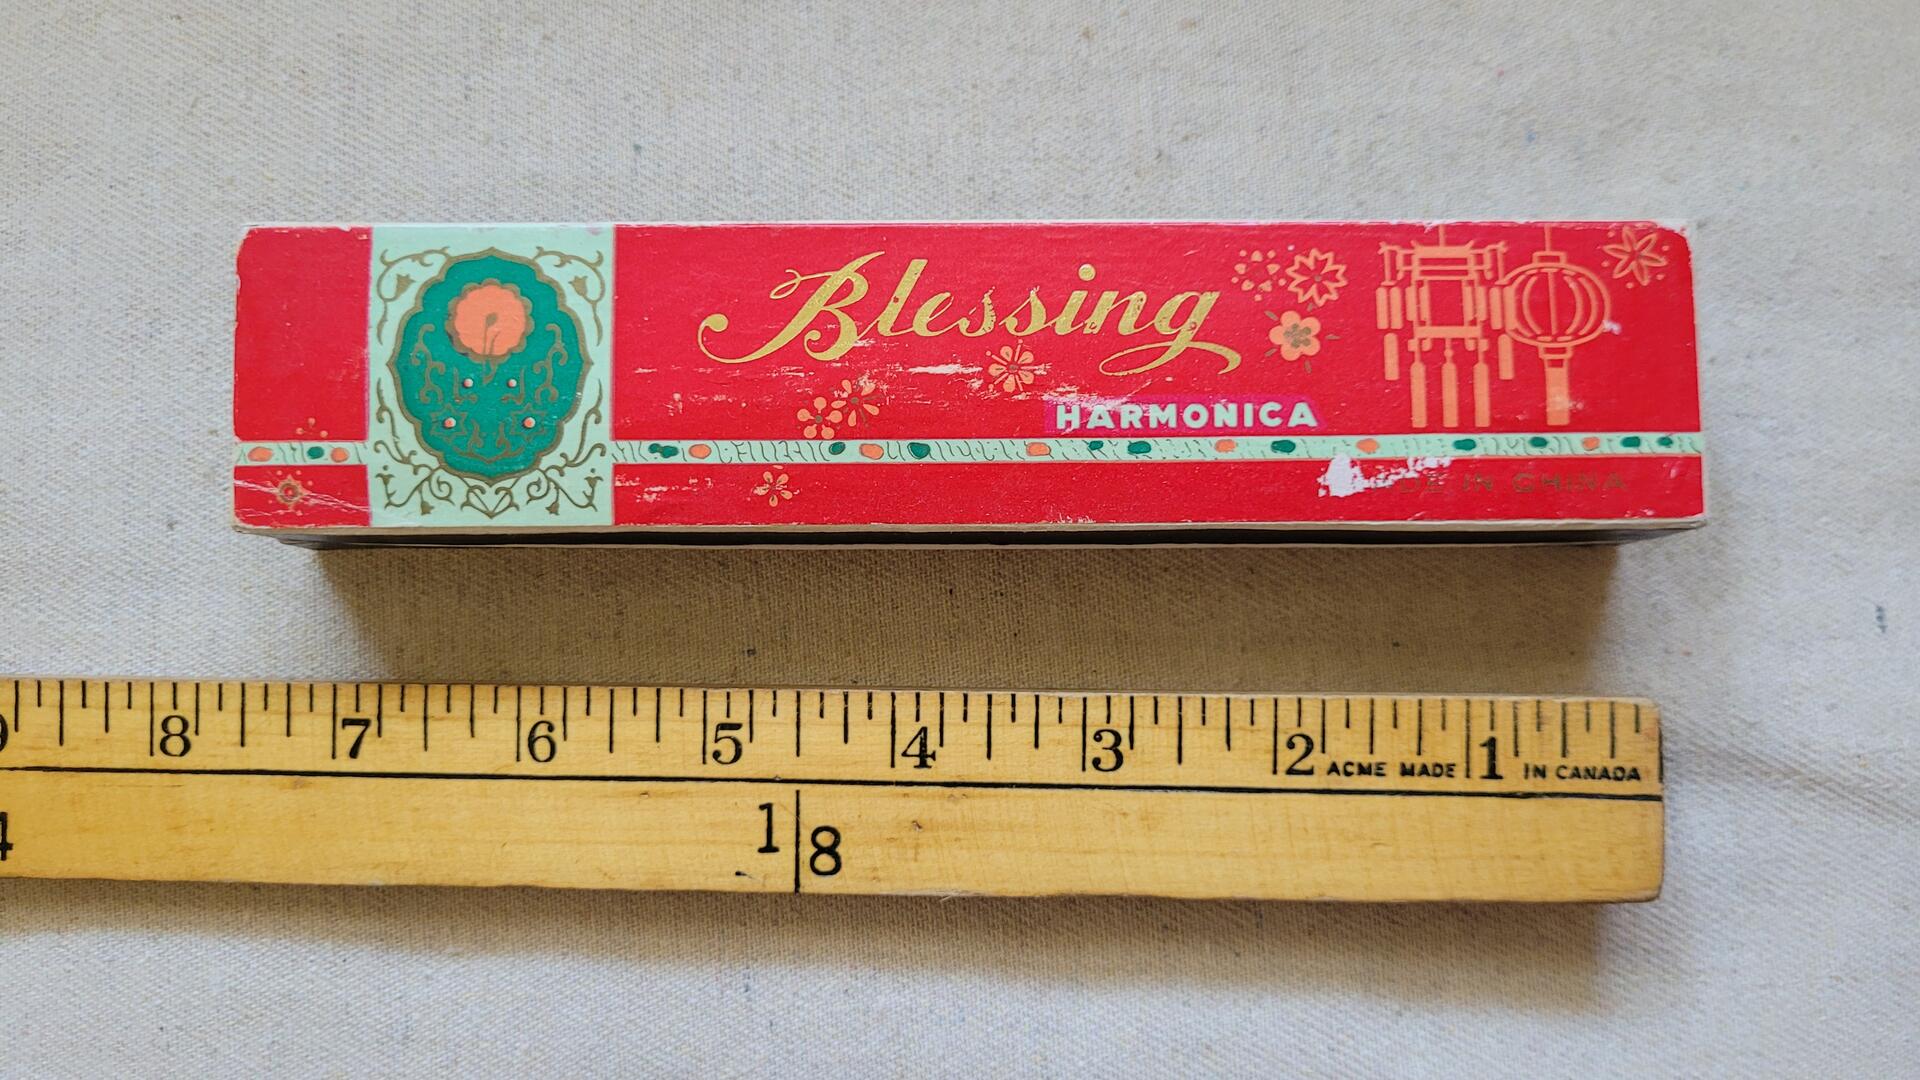 antique-harmonica-blessing-china-vintage-1960s-mcm-collectible-musical-instruments